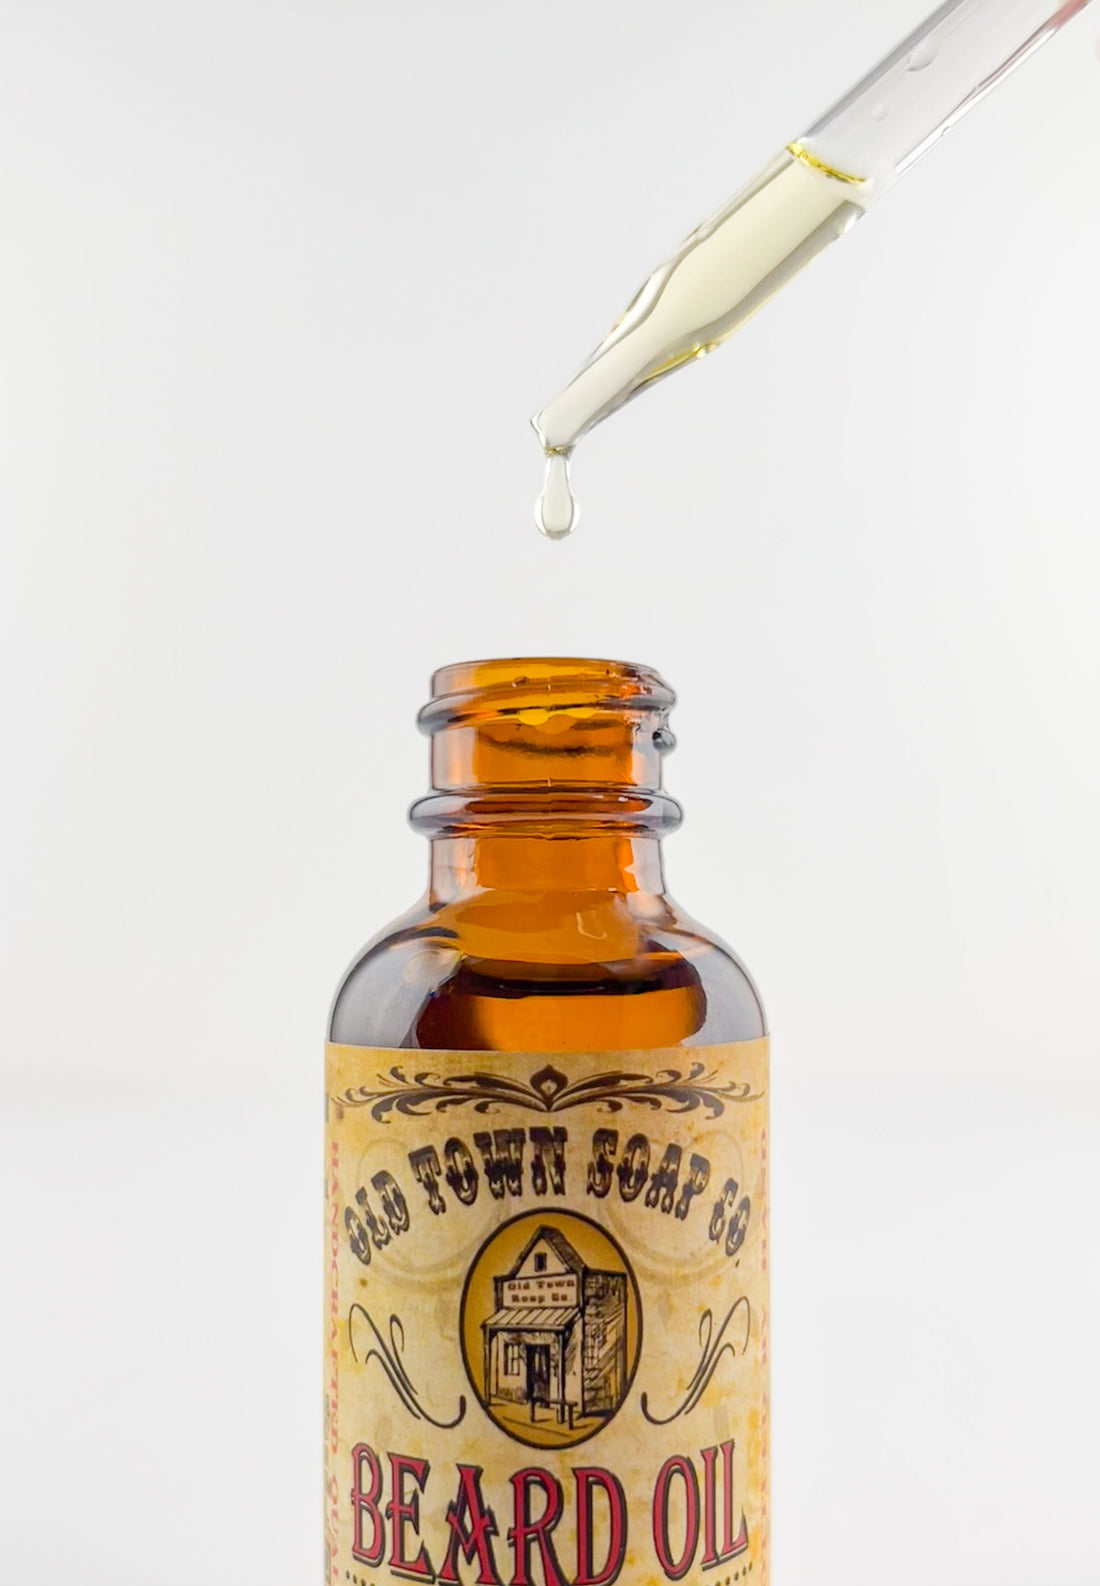 The Better Man Beard Oil - Old Town Soap Co.